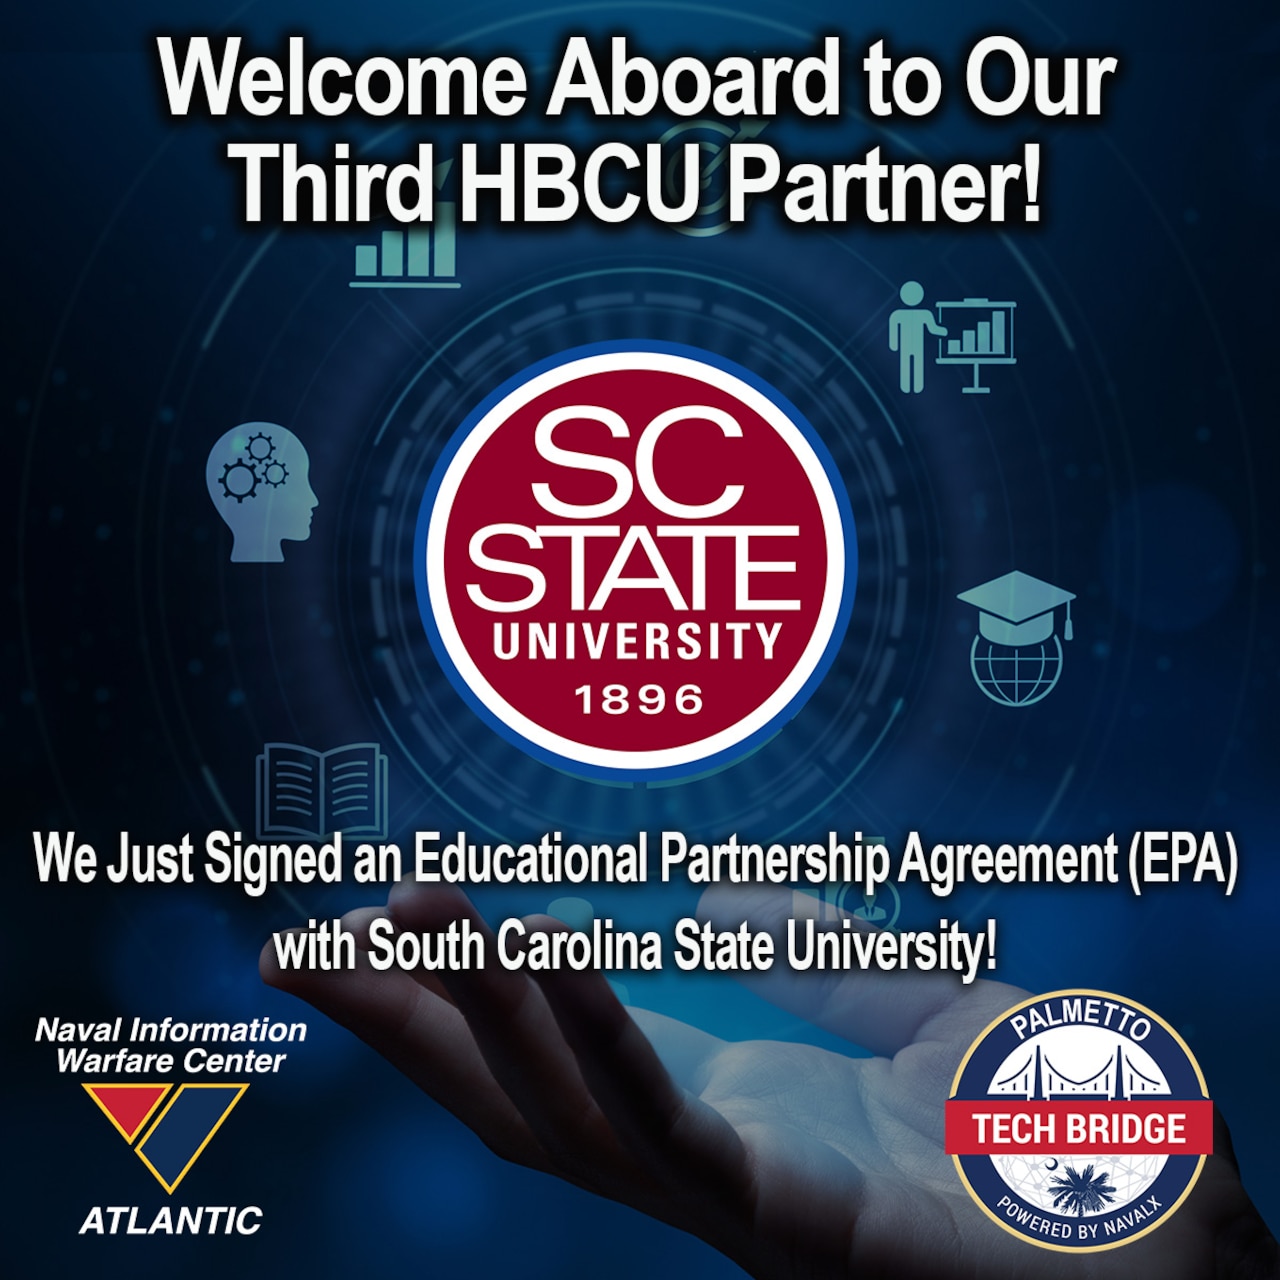 Graphic saying "Welcome Aboard to Our Third HBCU Partner! SC STATE UNIVERSITY 1896 -- We Just Signed an Educational Partnership Agreement (EPA) with South Carolina State University.